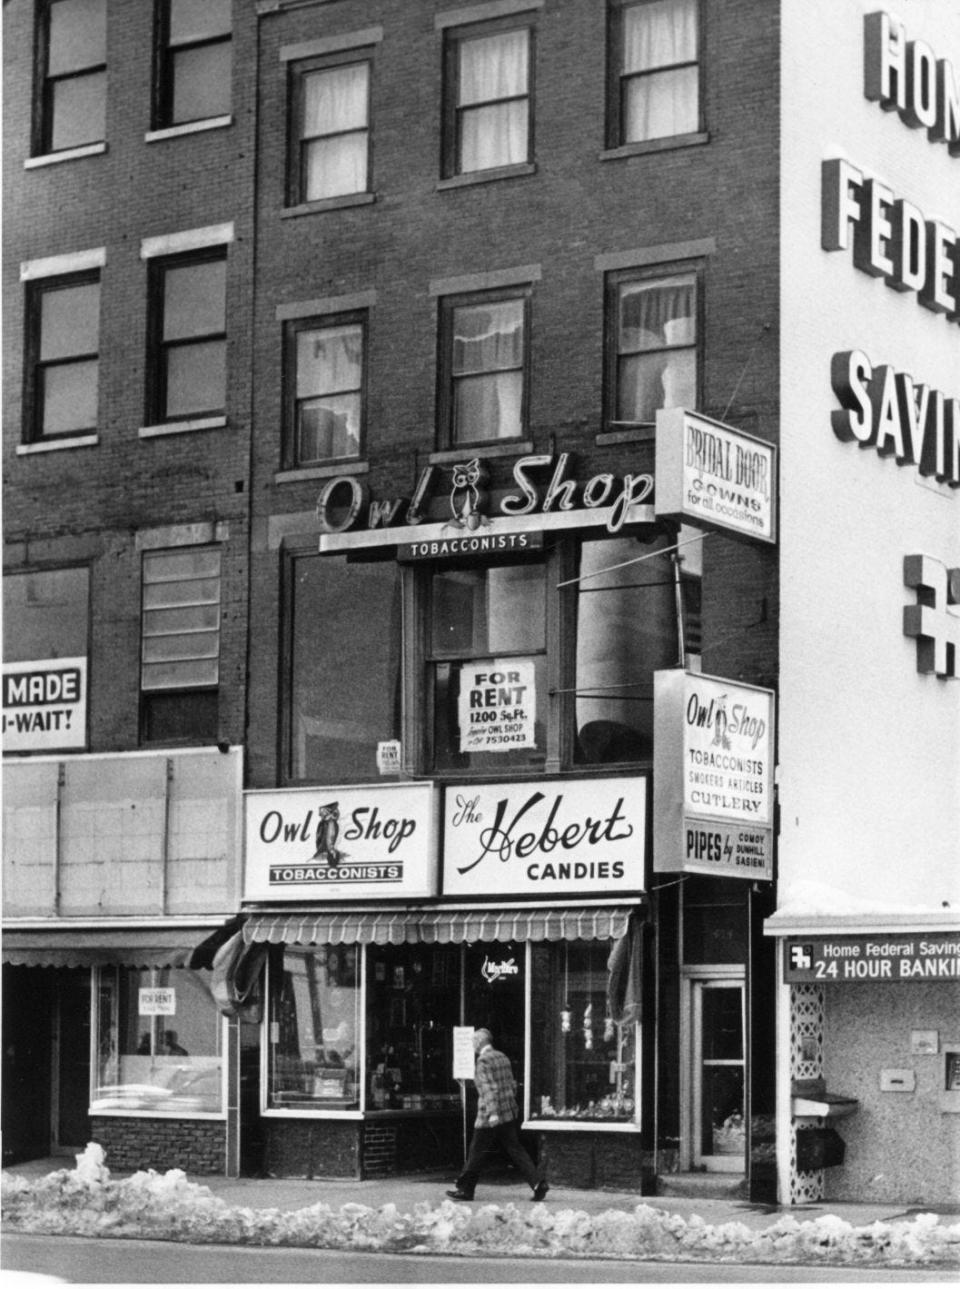 The Owl Shop, in 1977